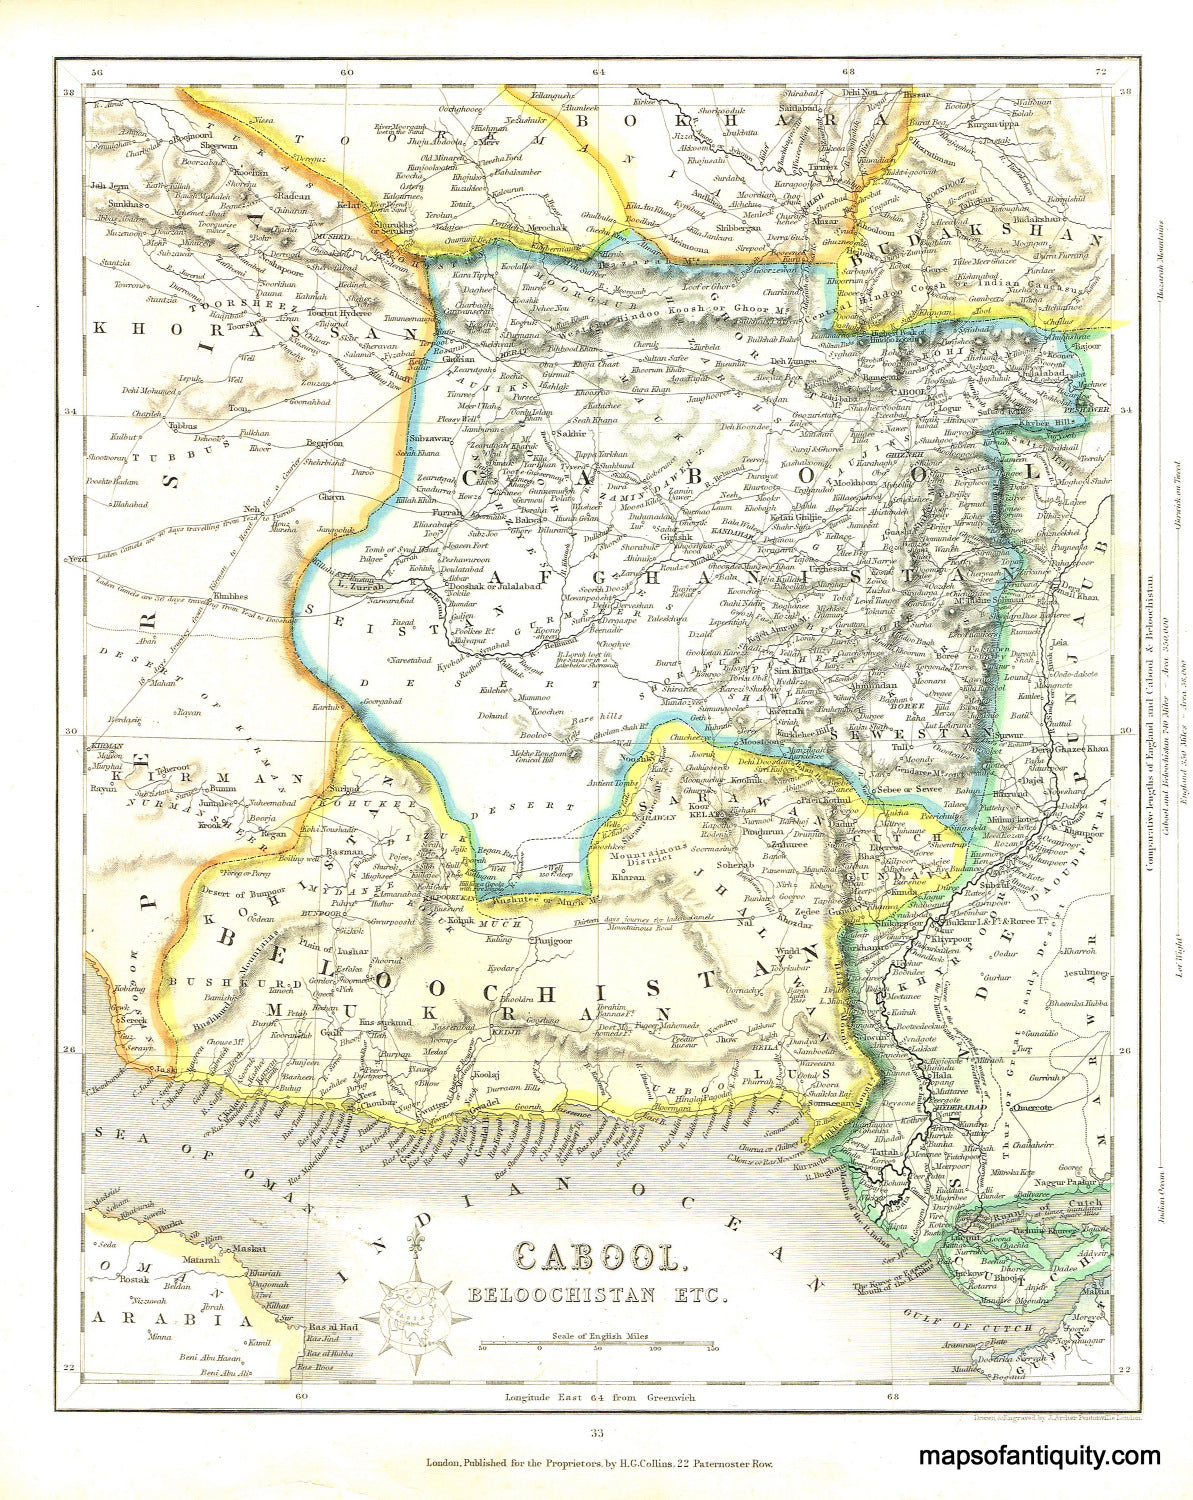 Antique-Hand-Colored-Map-Cabool-(Afghanistan)-Beloochistan-Etc.-**********-Asia--c.-1840-Collins-Maps-Of-Antiquity